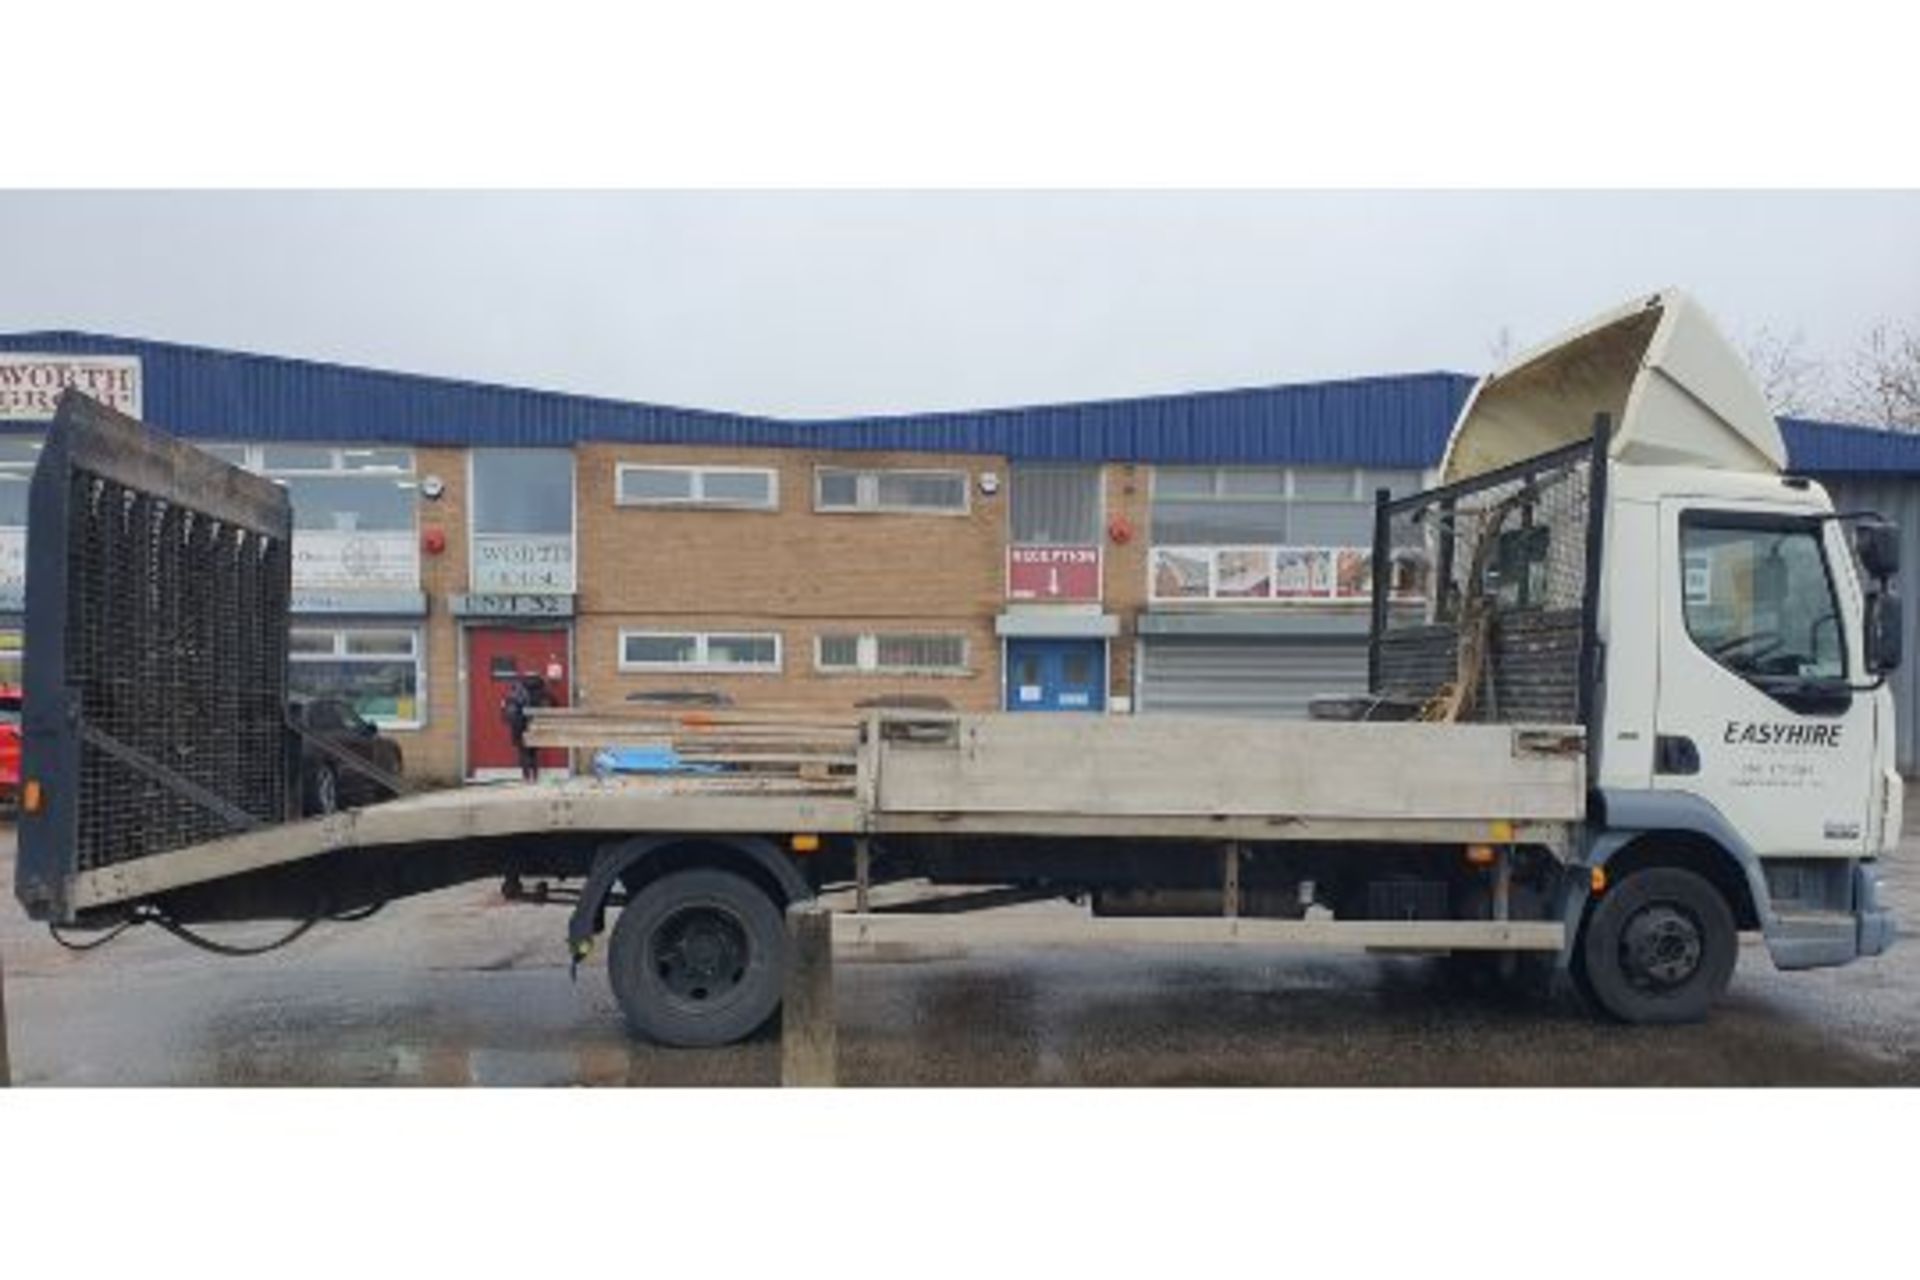 DAF LF 45.160 Flatbed Lorry w/ Loading Ramp & Electric Winch | DIG 4987 | 494,328km | *Non Runner* - Image 10 of 22